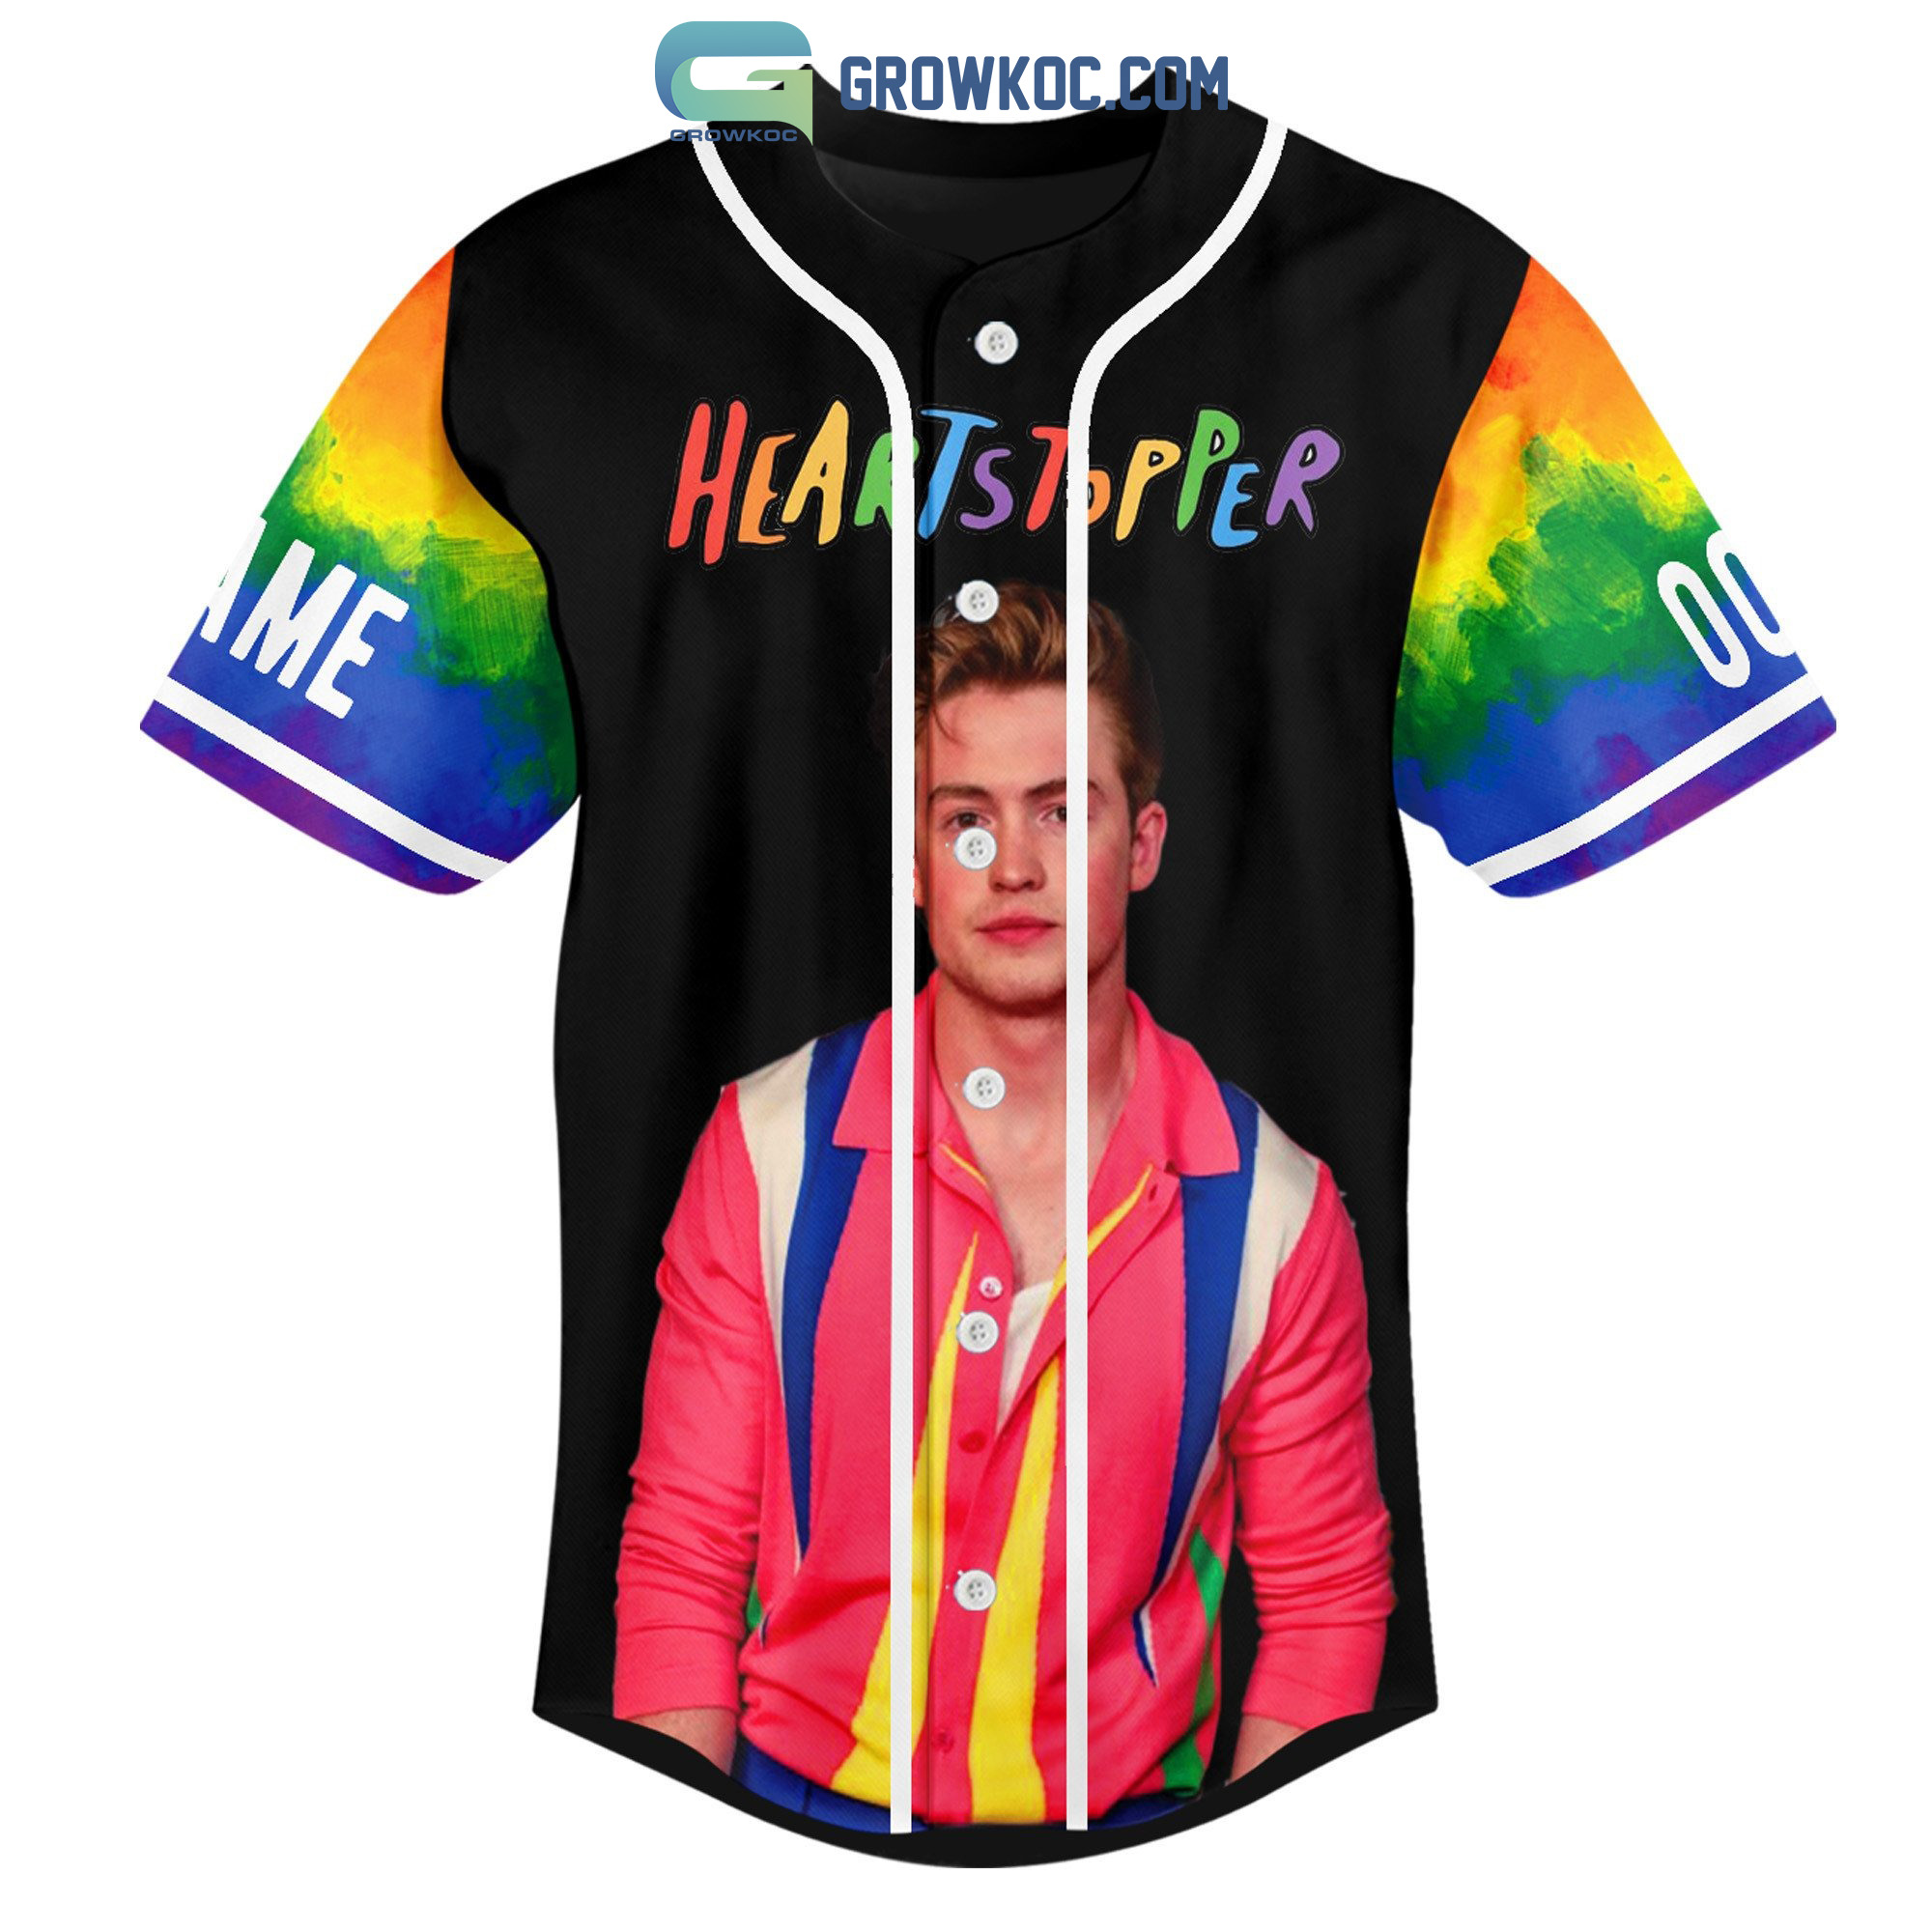 Nick Nelson Heartstopper I'm Bi Actually And So What Personalized Baseball Jersey